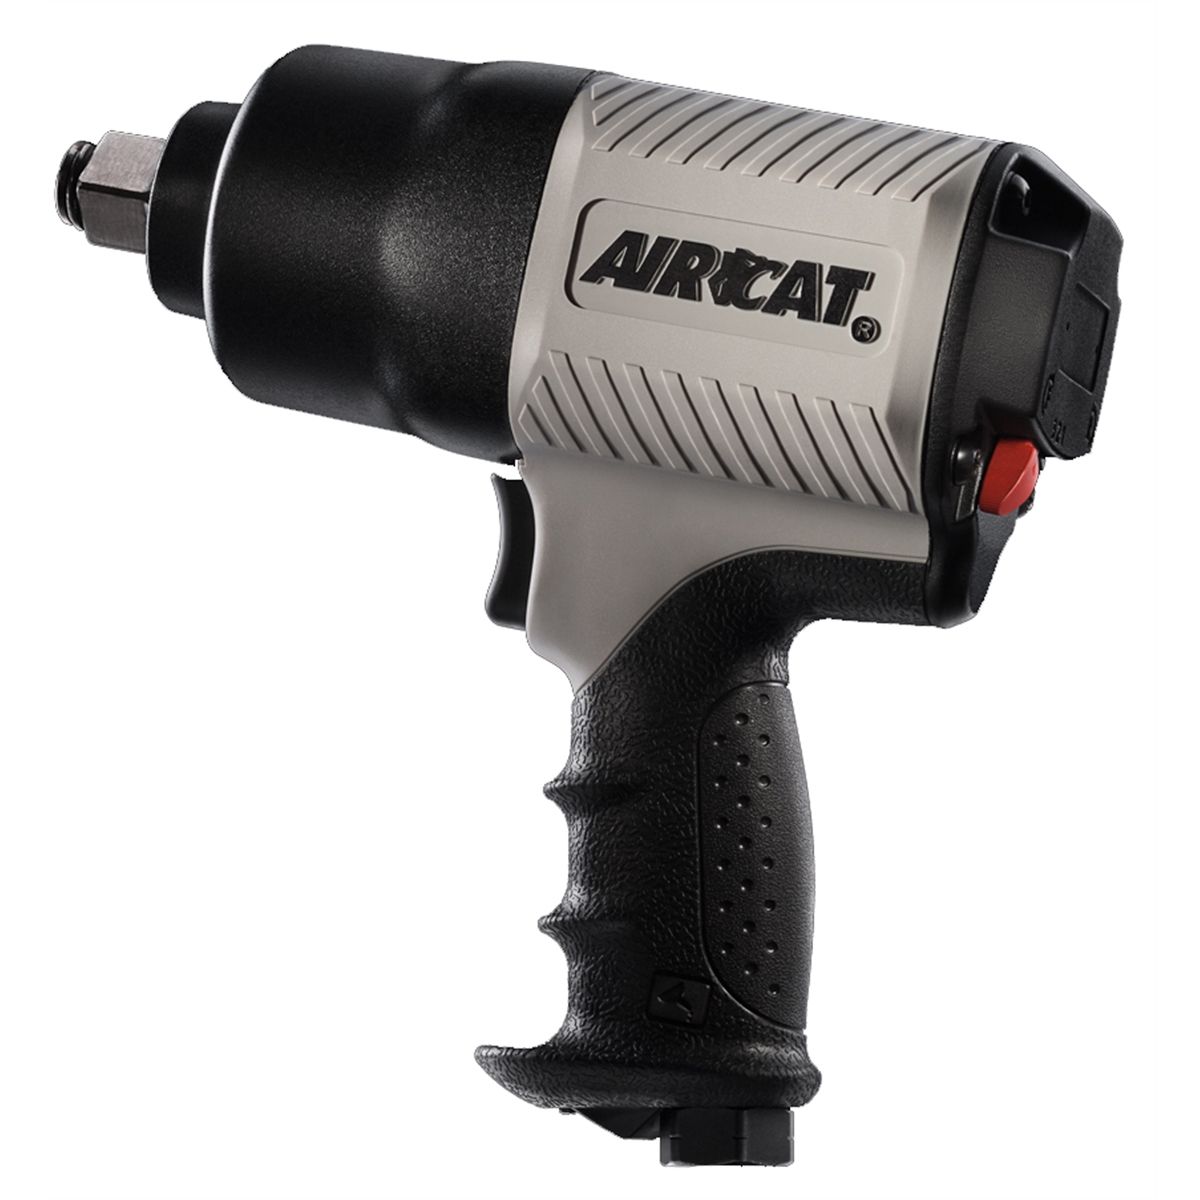 AIRCAT 3/4 in Heavy Duty Impact Wrench Twin Hammer 1,400 ft.-lb Loosening Torque 